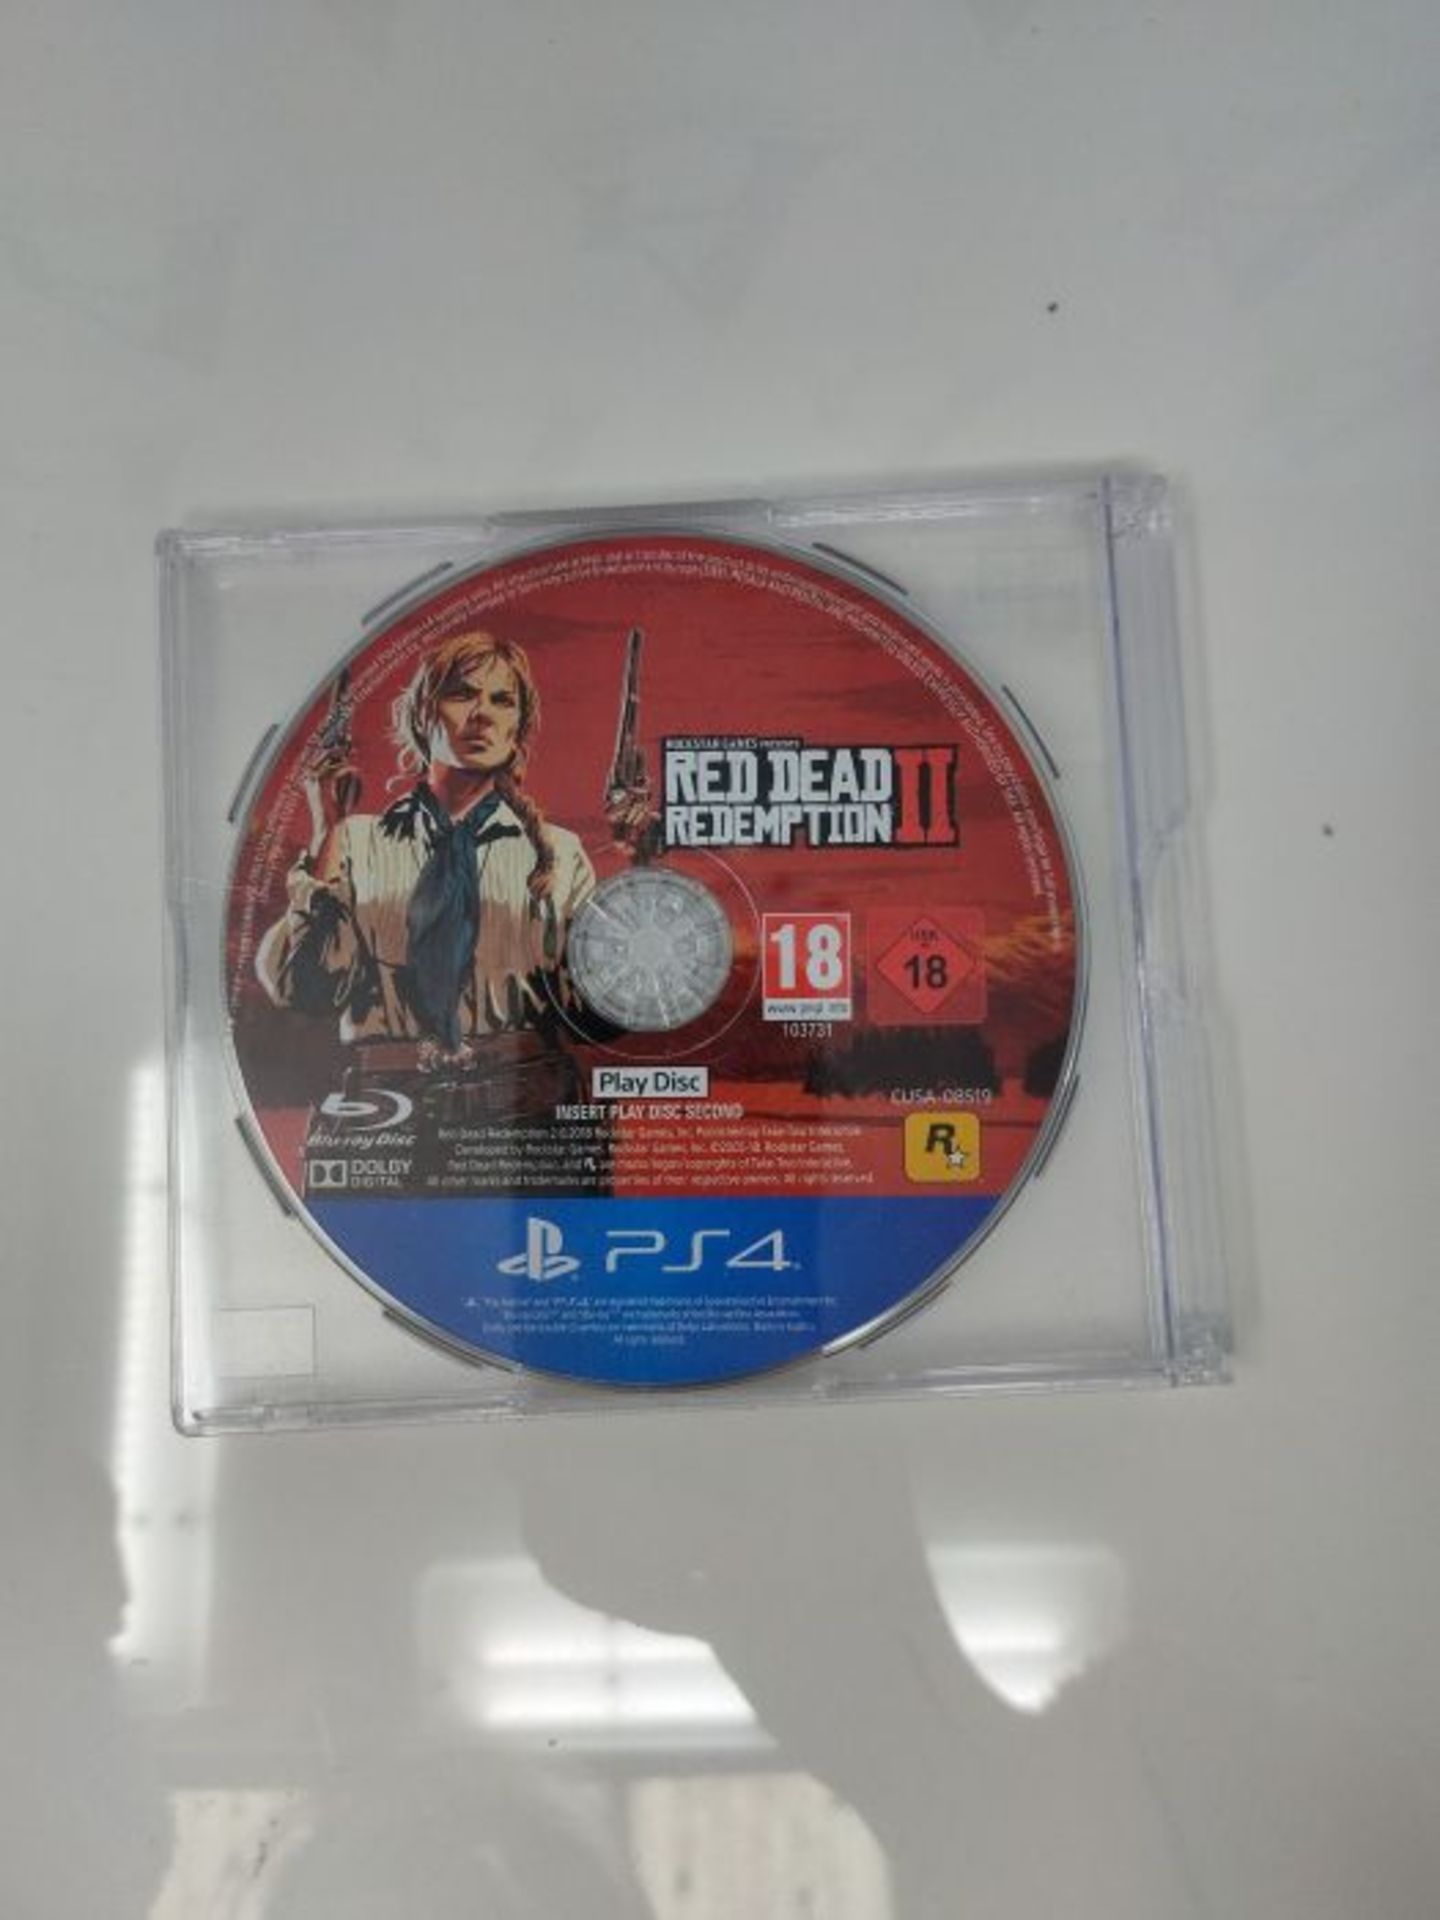 Red Dead Redemption 2 (PS4) - Image 2 of 2